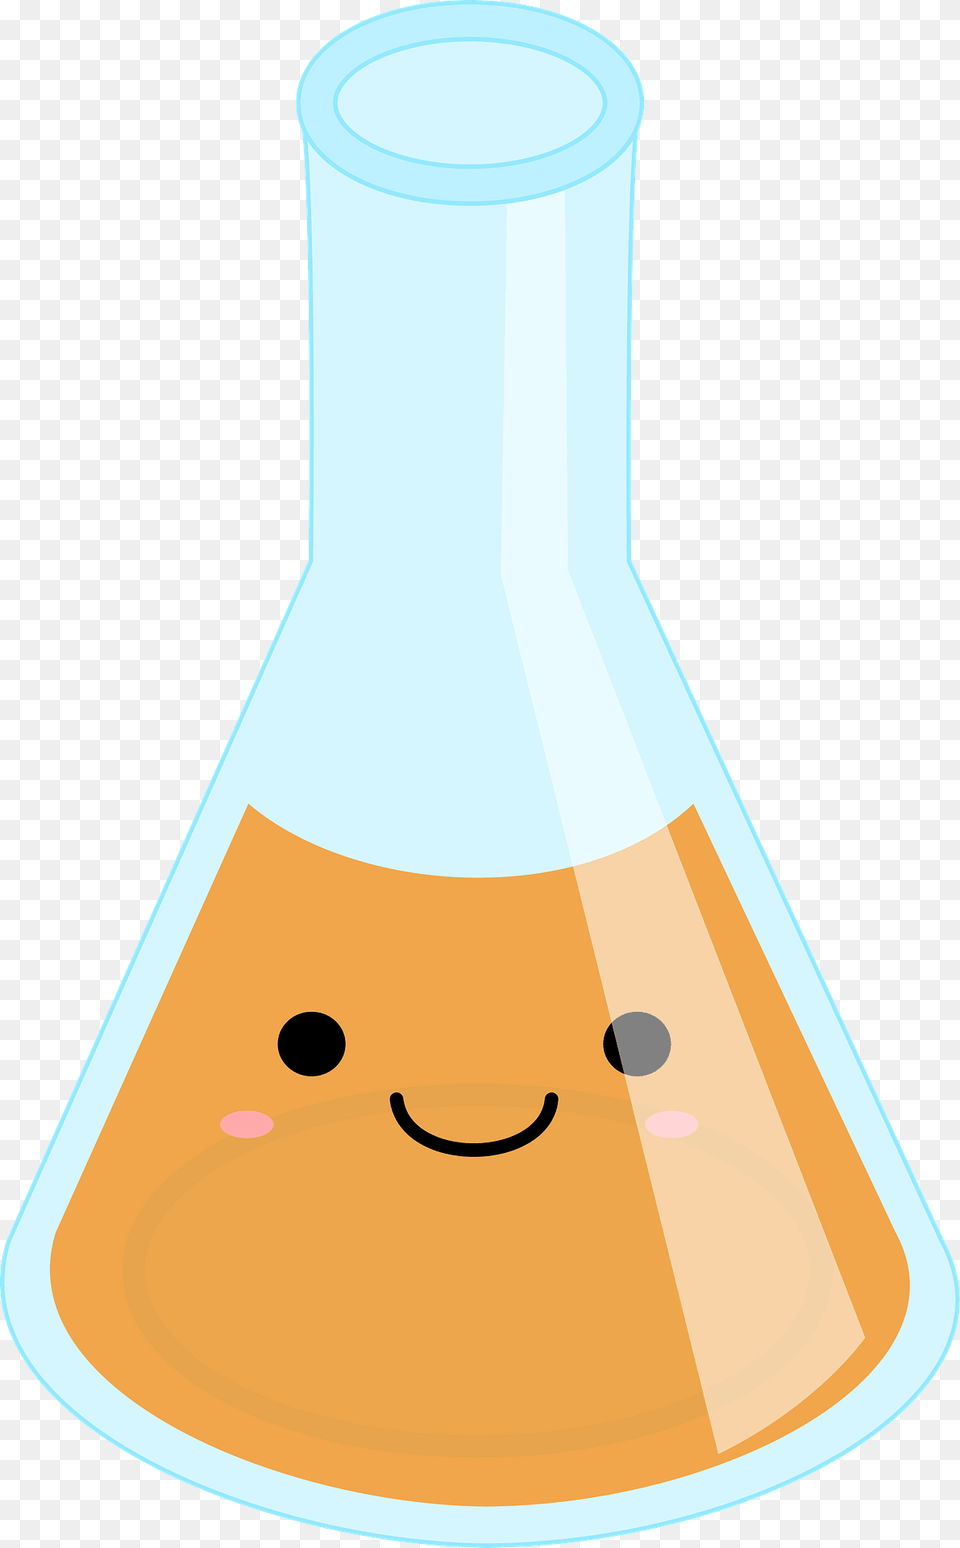 Erlenmeyer Flask Filled With Orange Liquid Face In The Glass Clipart, Cone, Jar, Cup Free Transparent Png